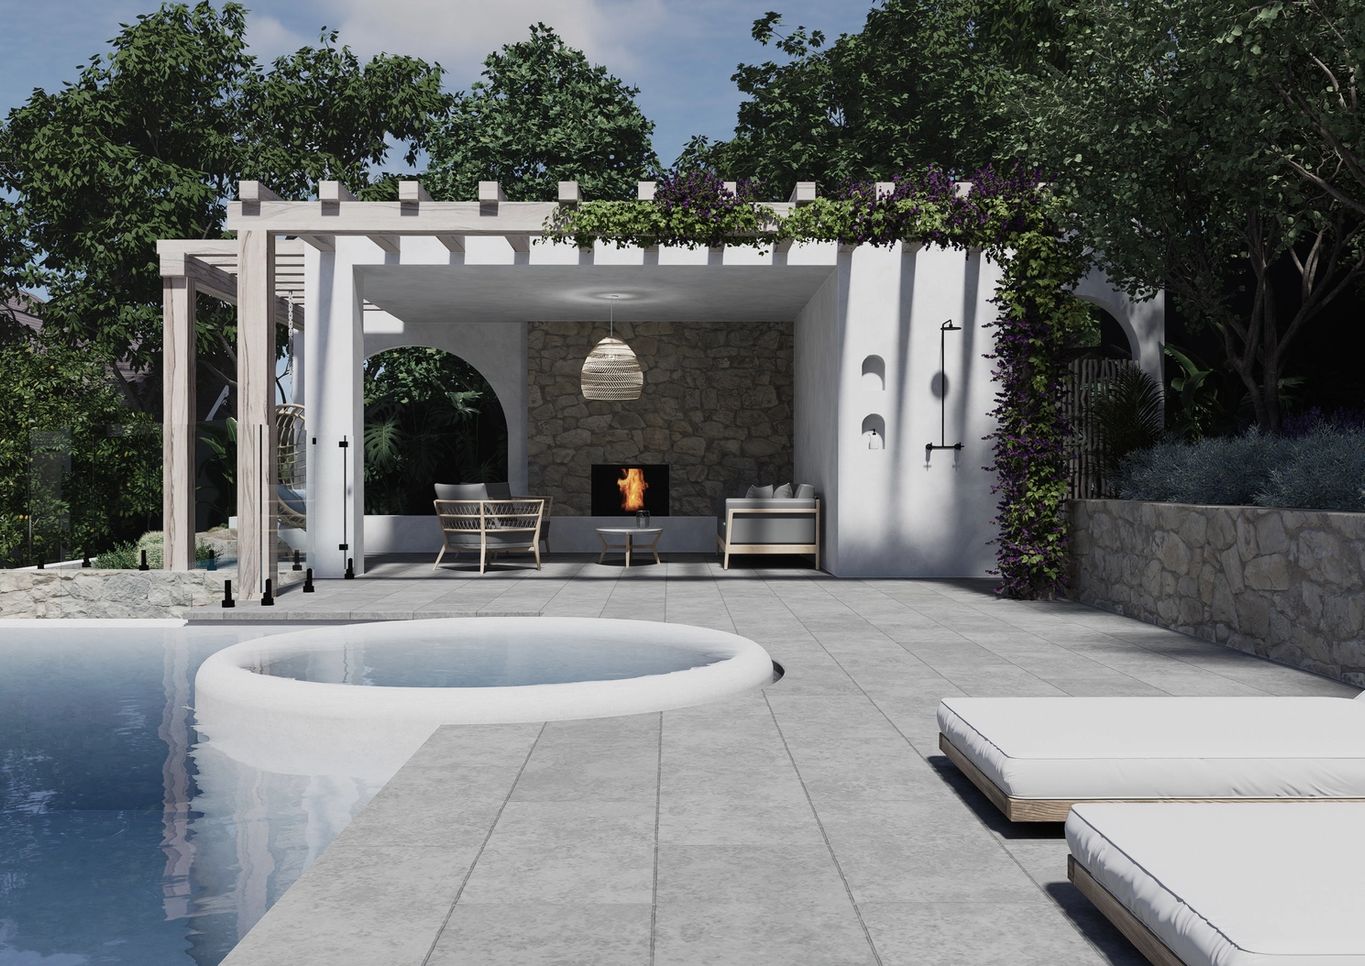 Greek resort inspired pool and alfresco area with white round spa and outdoor firepit